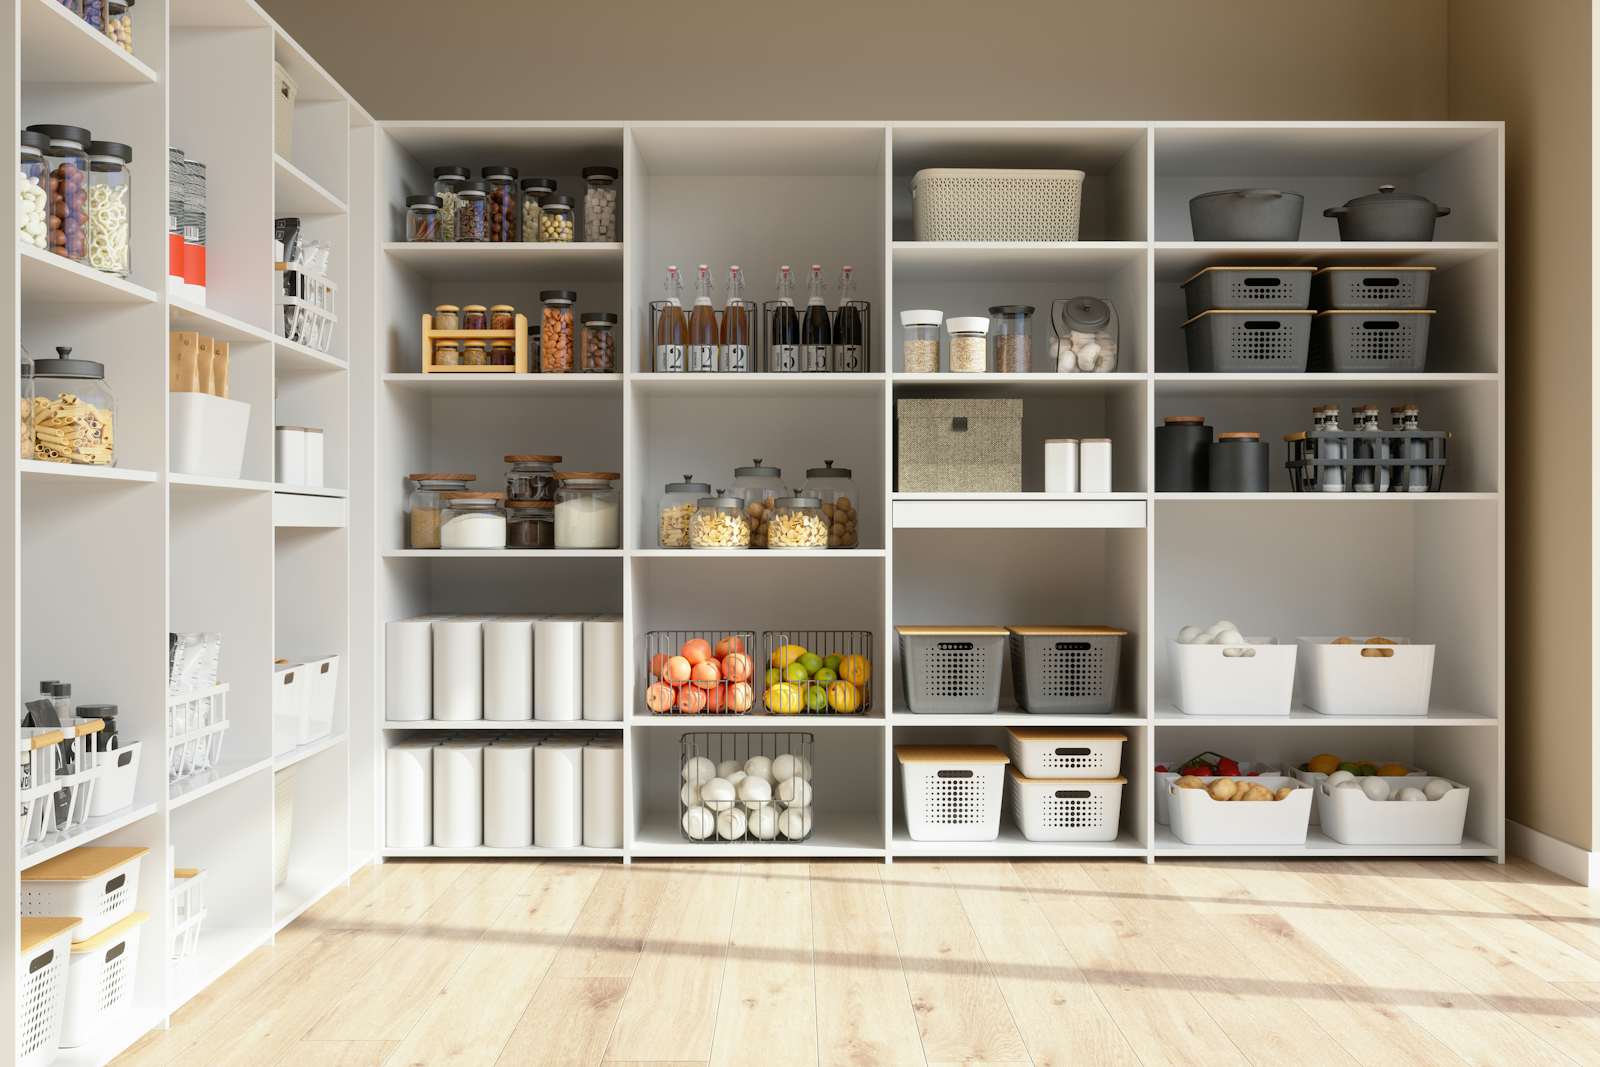 Organised Pantry Items In Storage Room With Nonperishable Food Staples